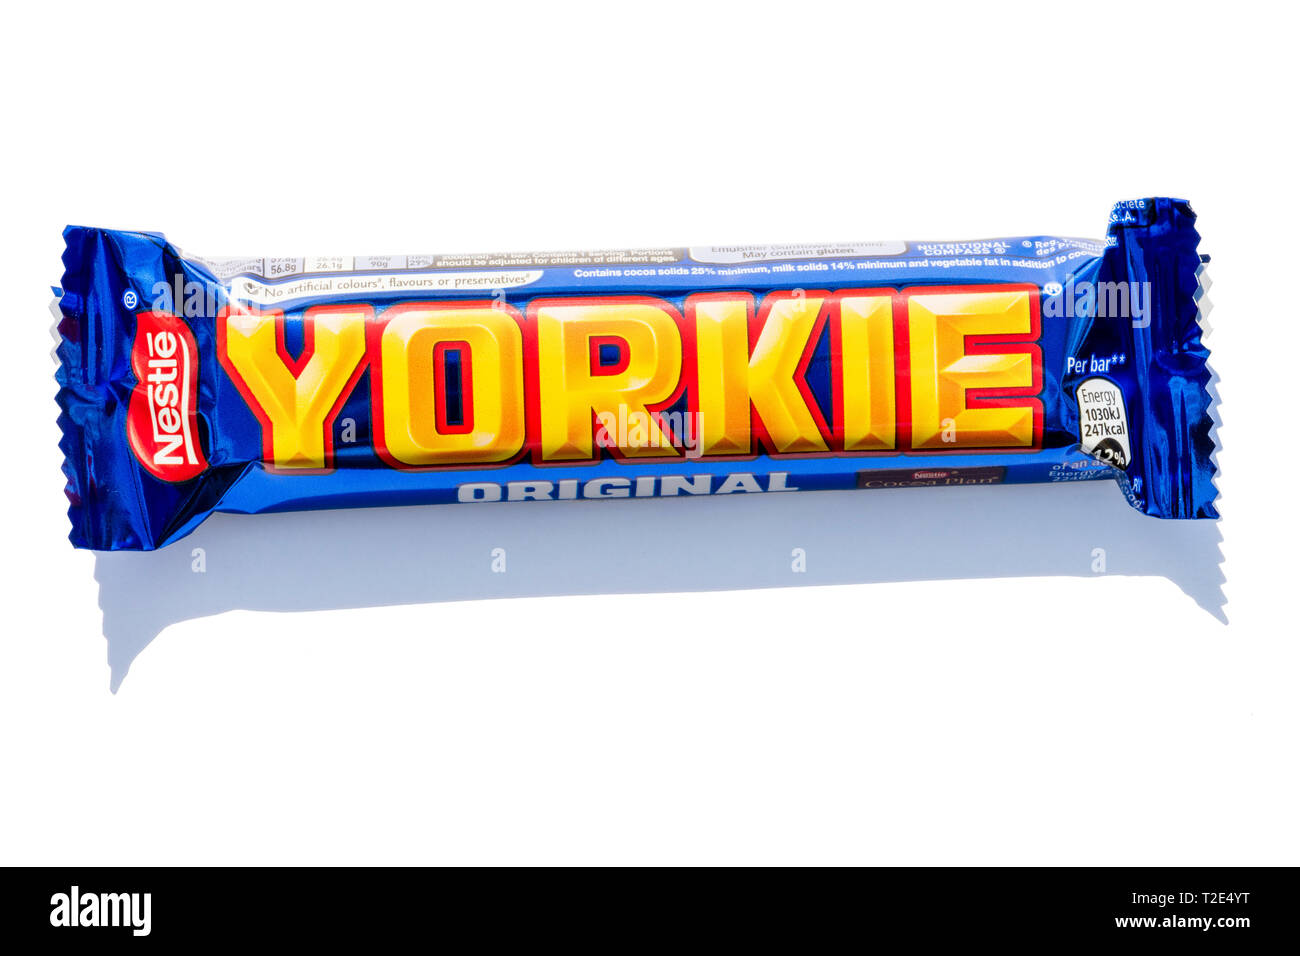 Yorkie chocolate bar, cut out or isolated on a white background. Stock Photo